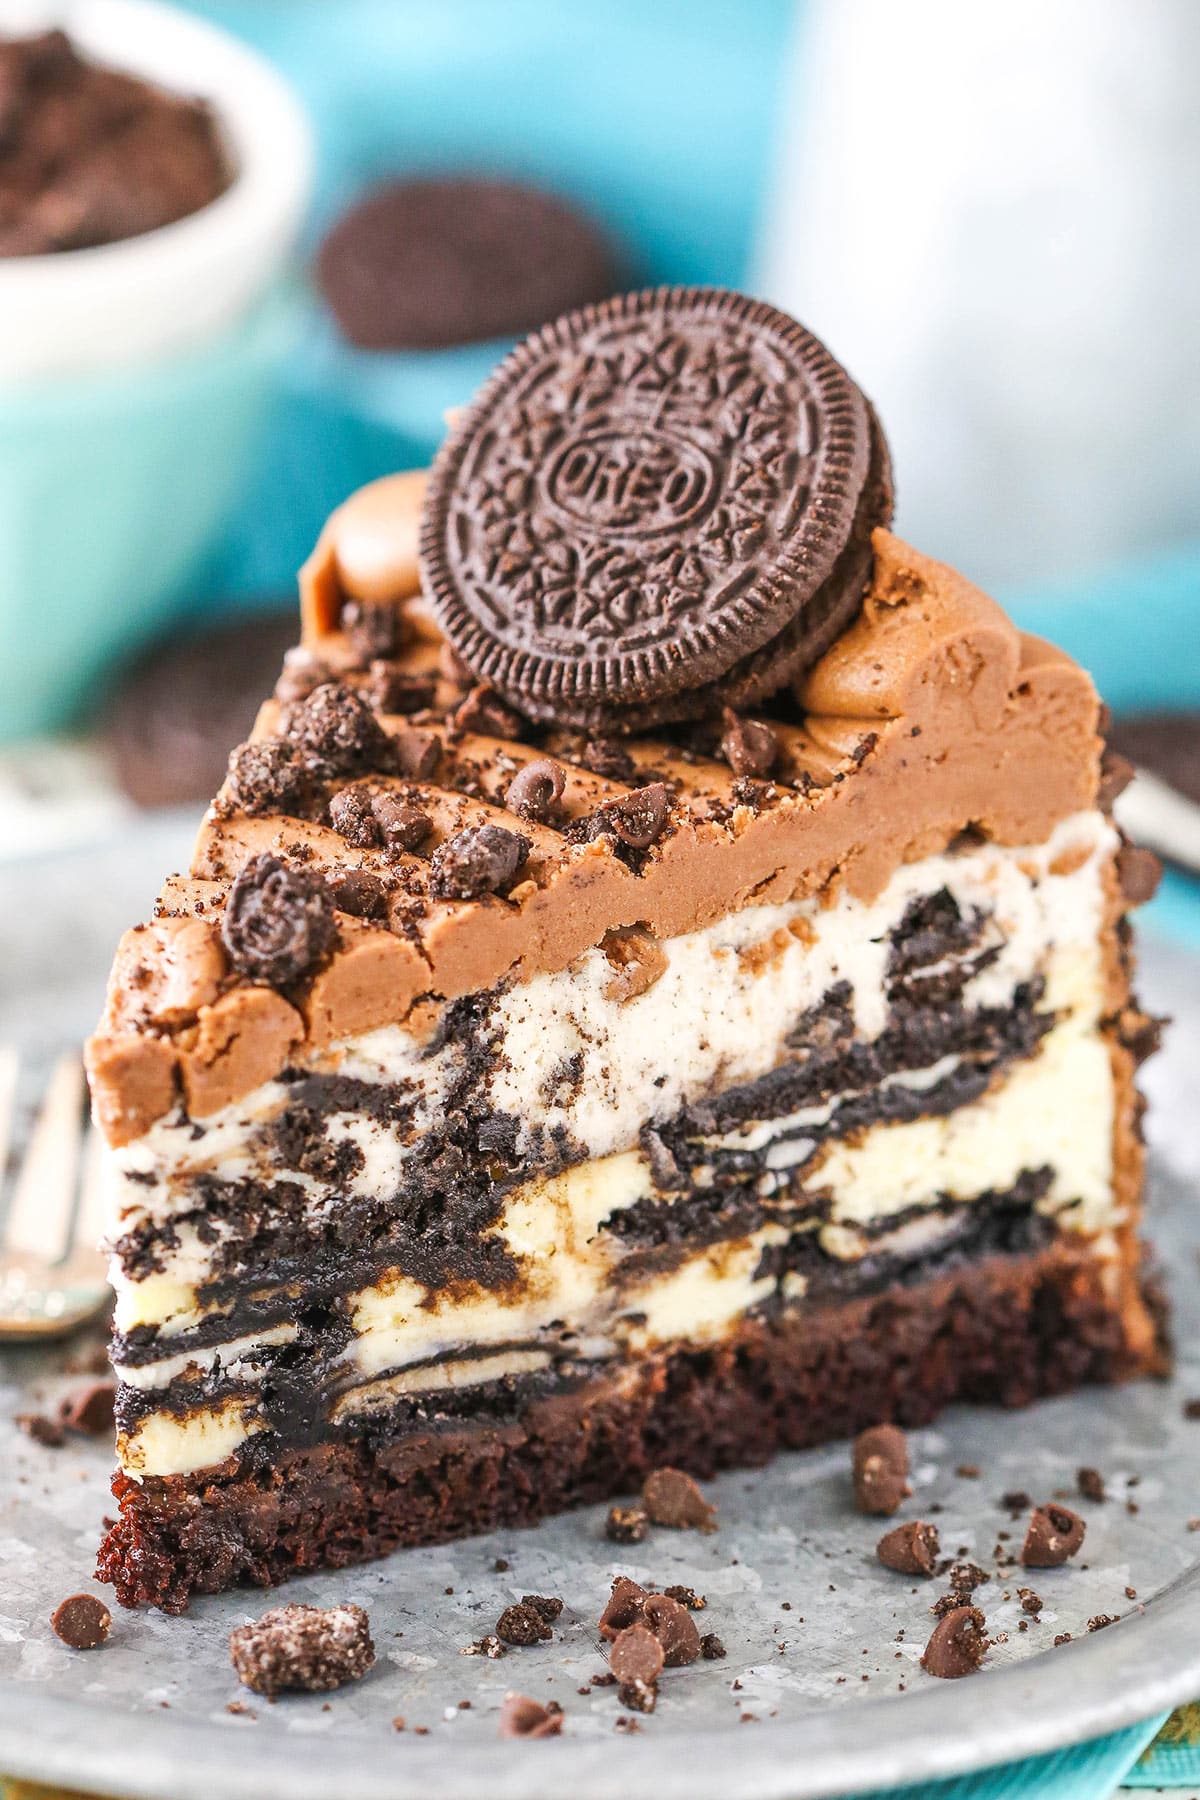 As slice of ultimate Oreo cheesecake on a plate.